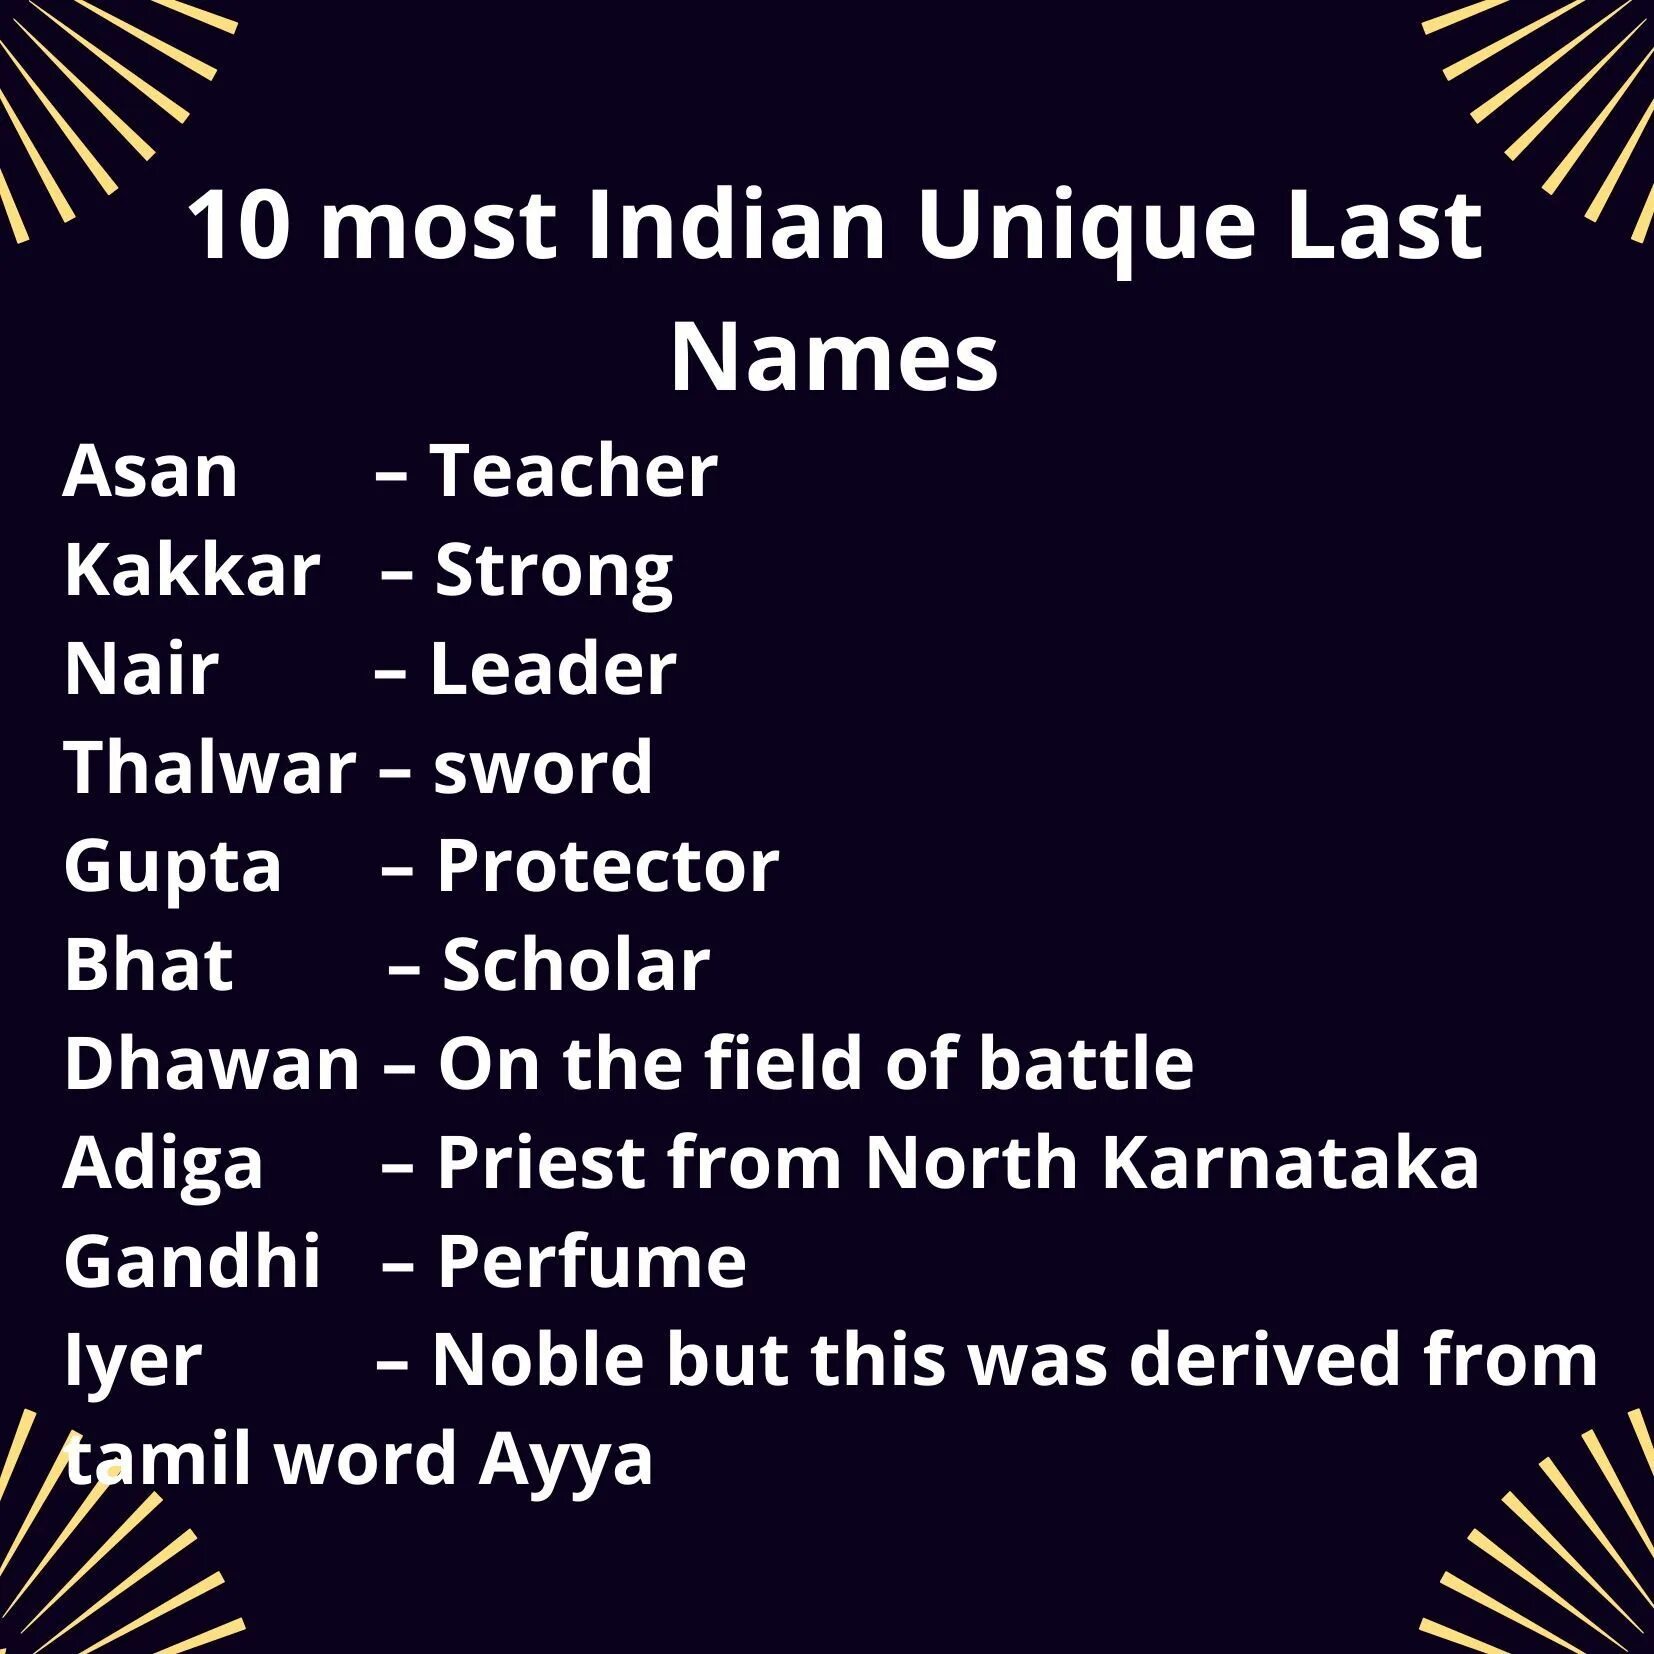 Last names meaning. Indian names. Indian surnames. Last name. English last names.